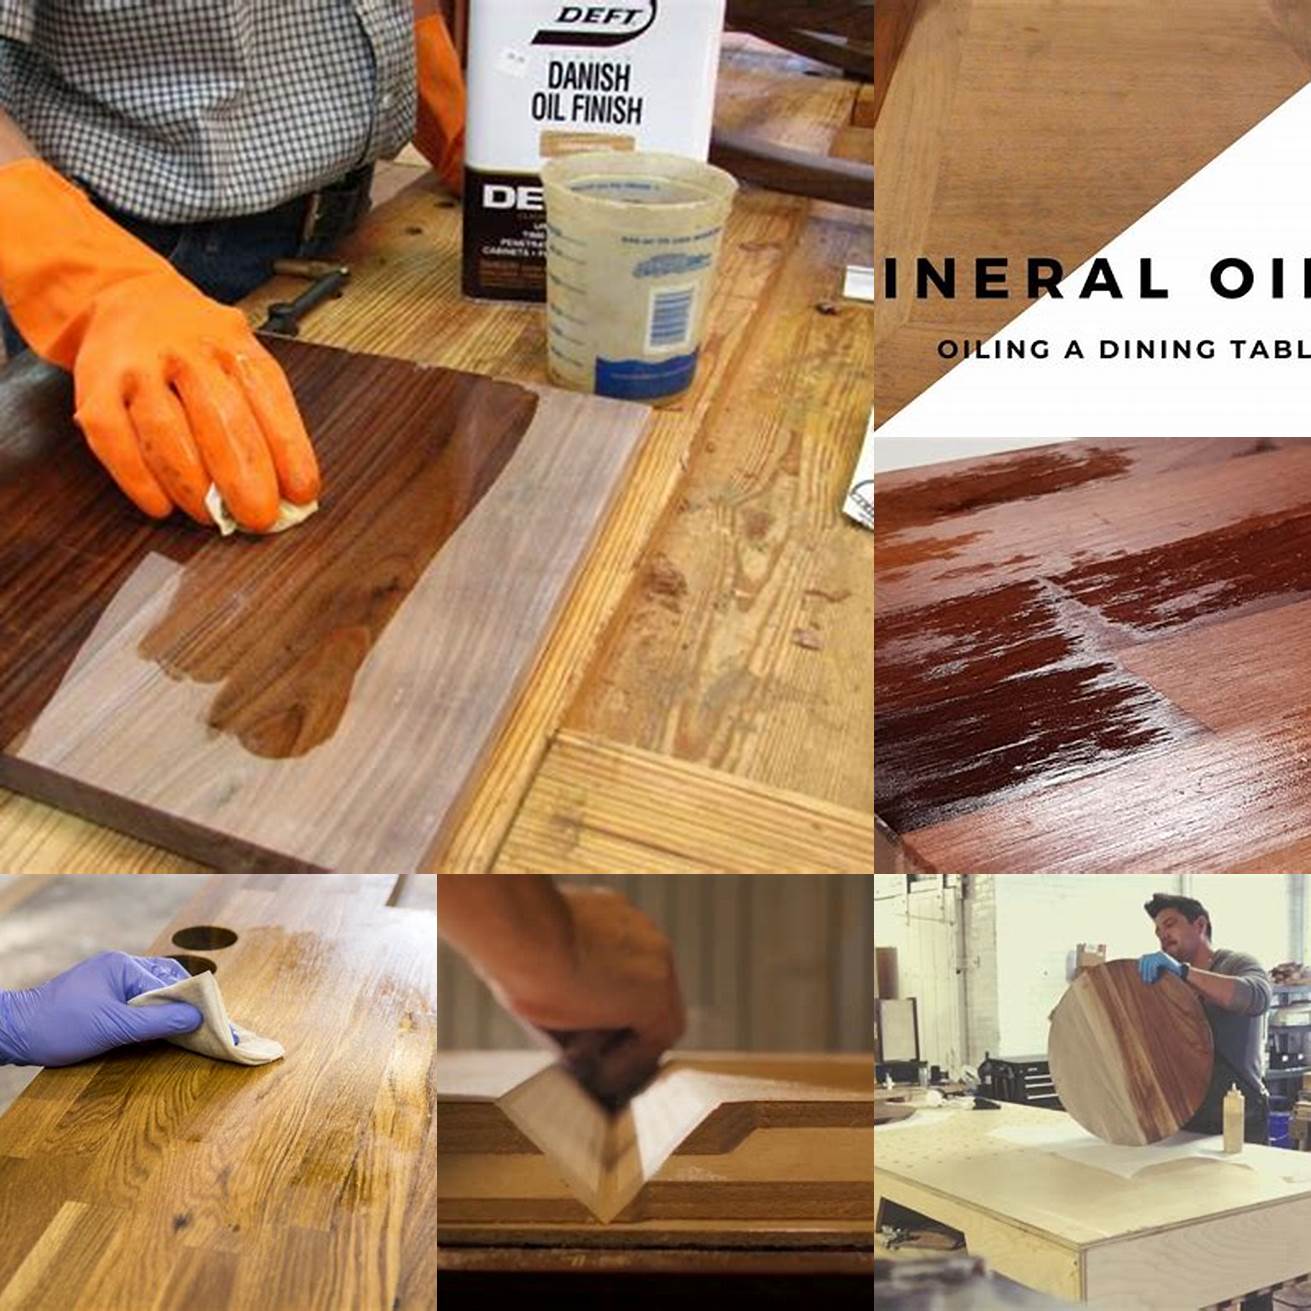 Oiling Process